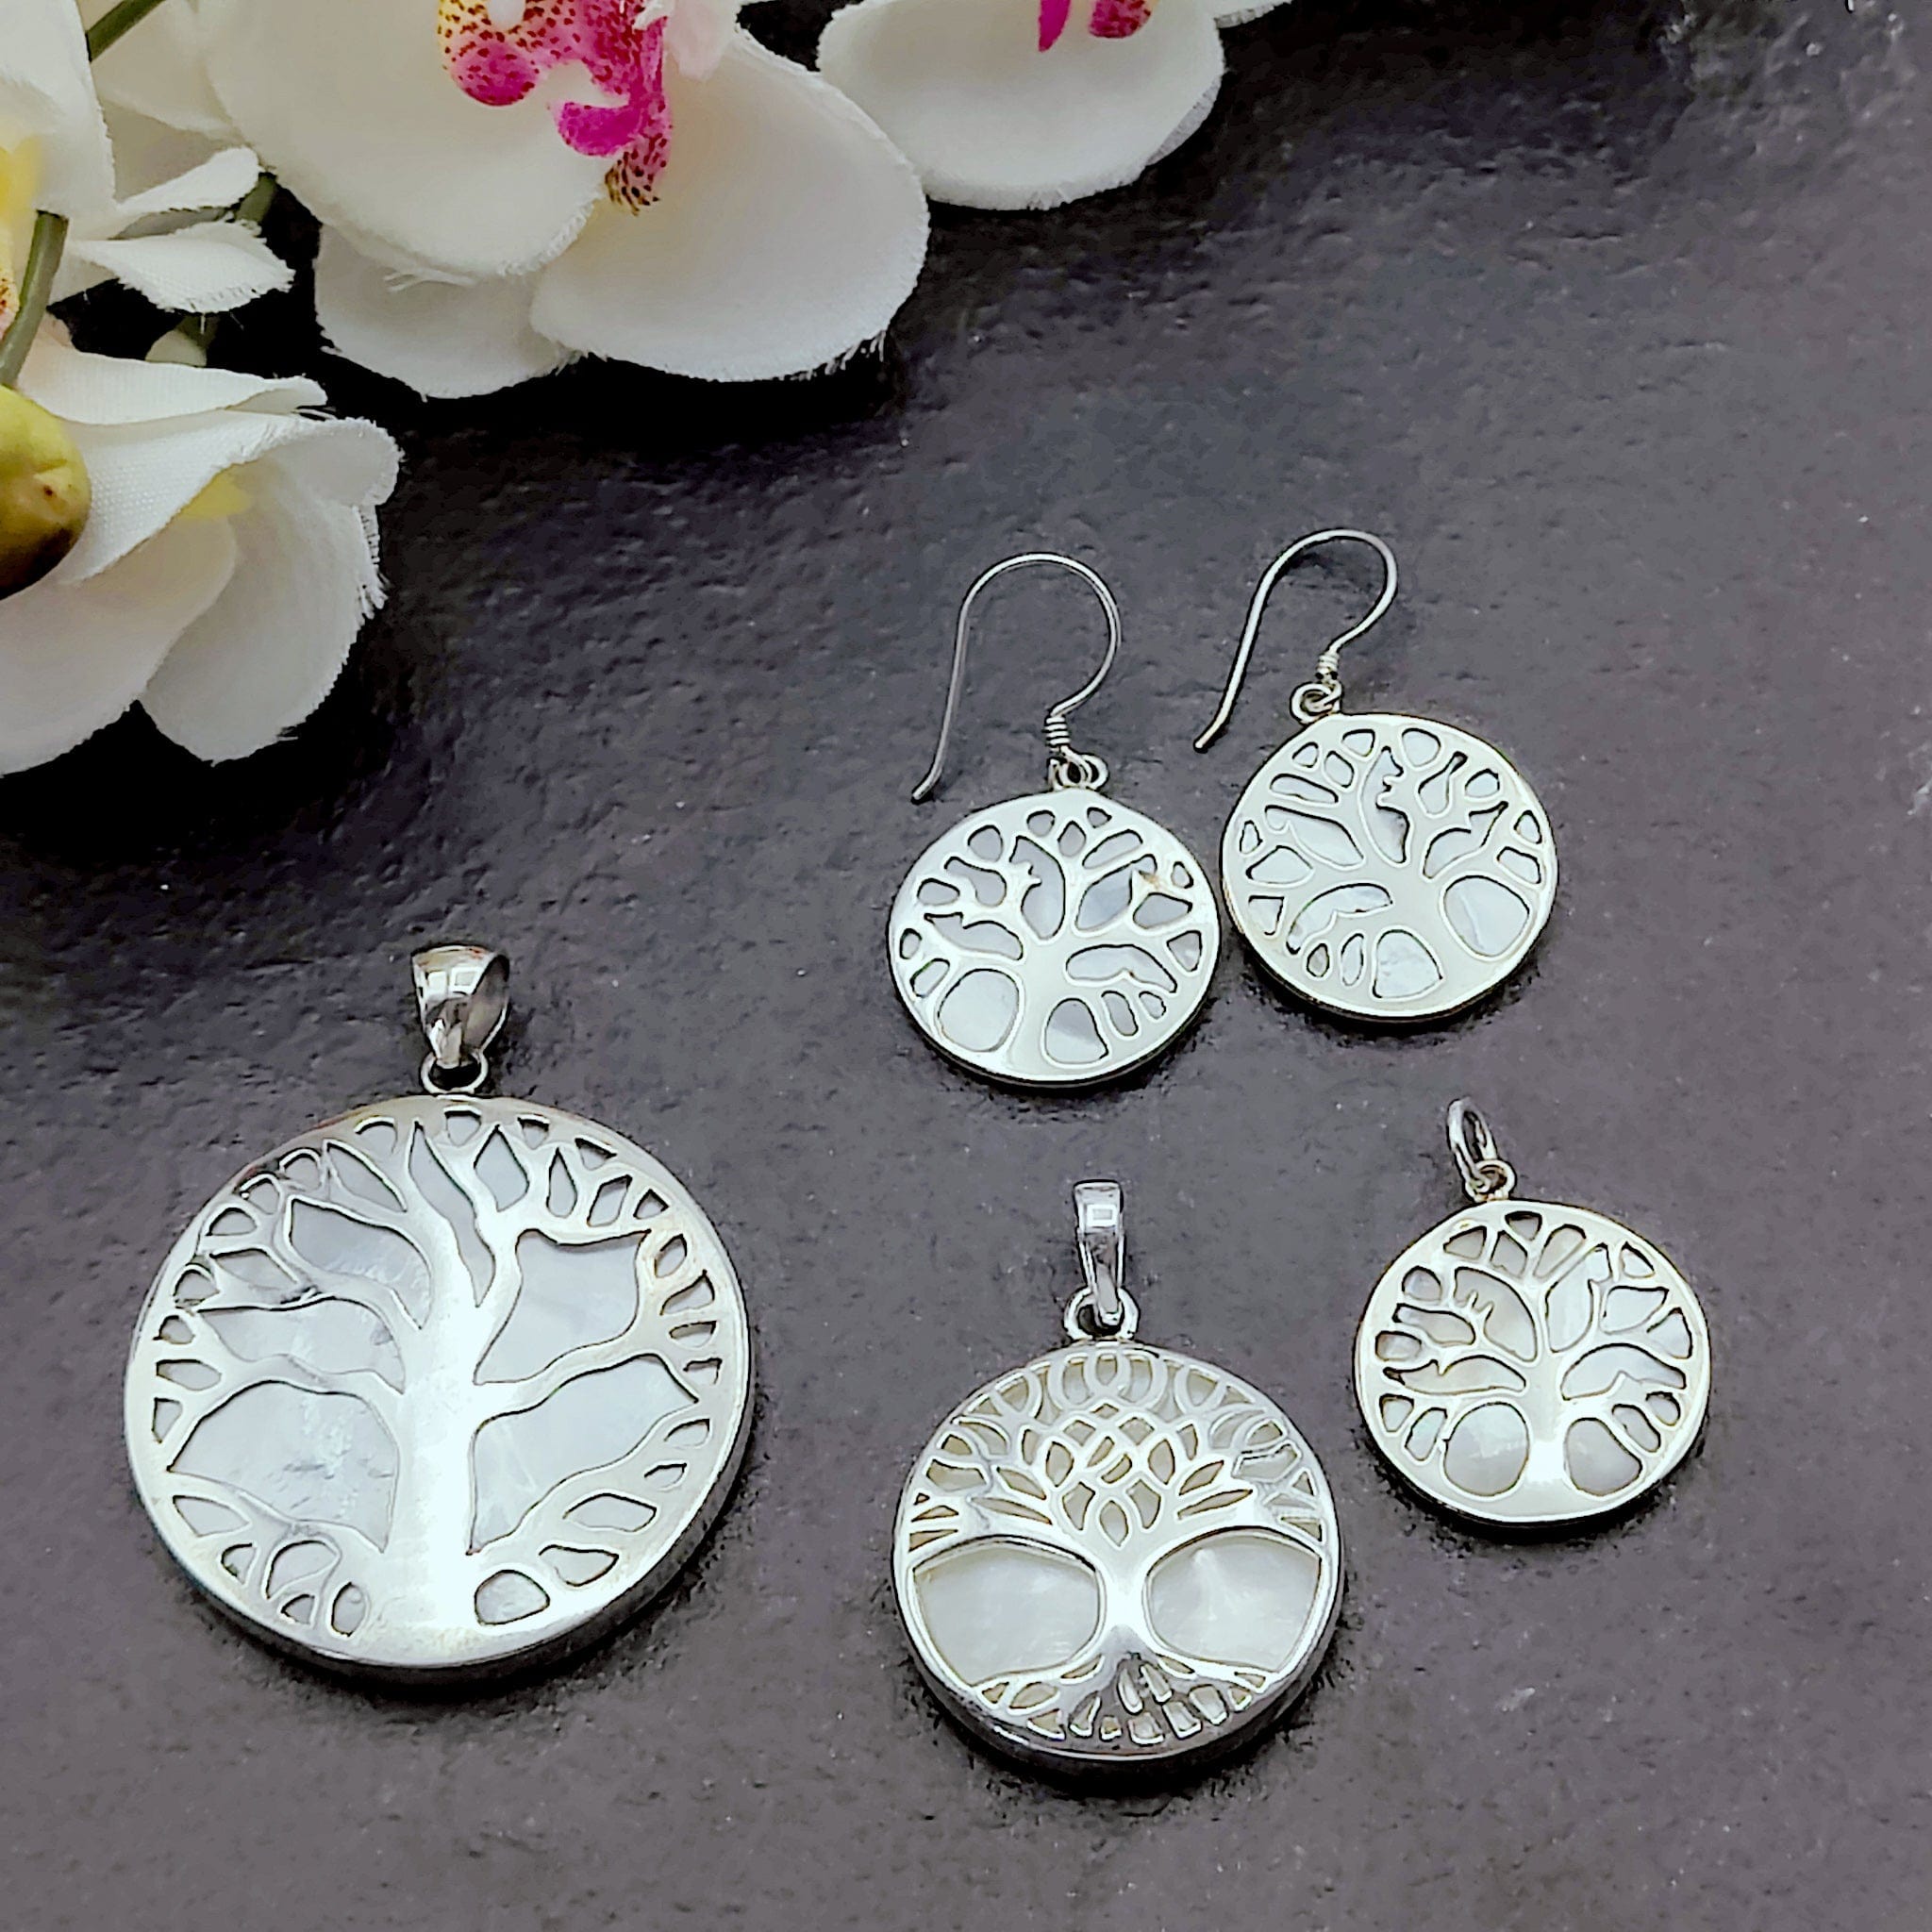 Hepburn and Hughes Mother of Pearl Pendant | 27mm Tree of Life Pendant | Sterling Silver